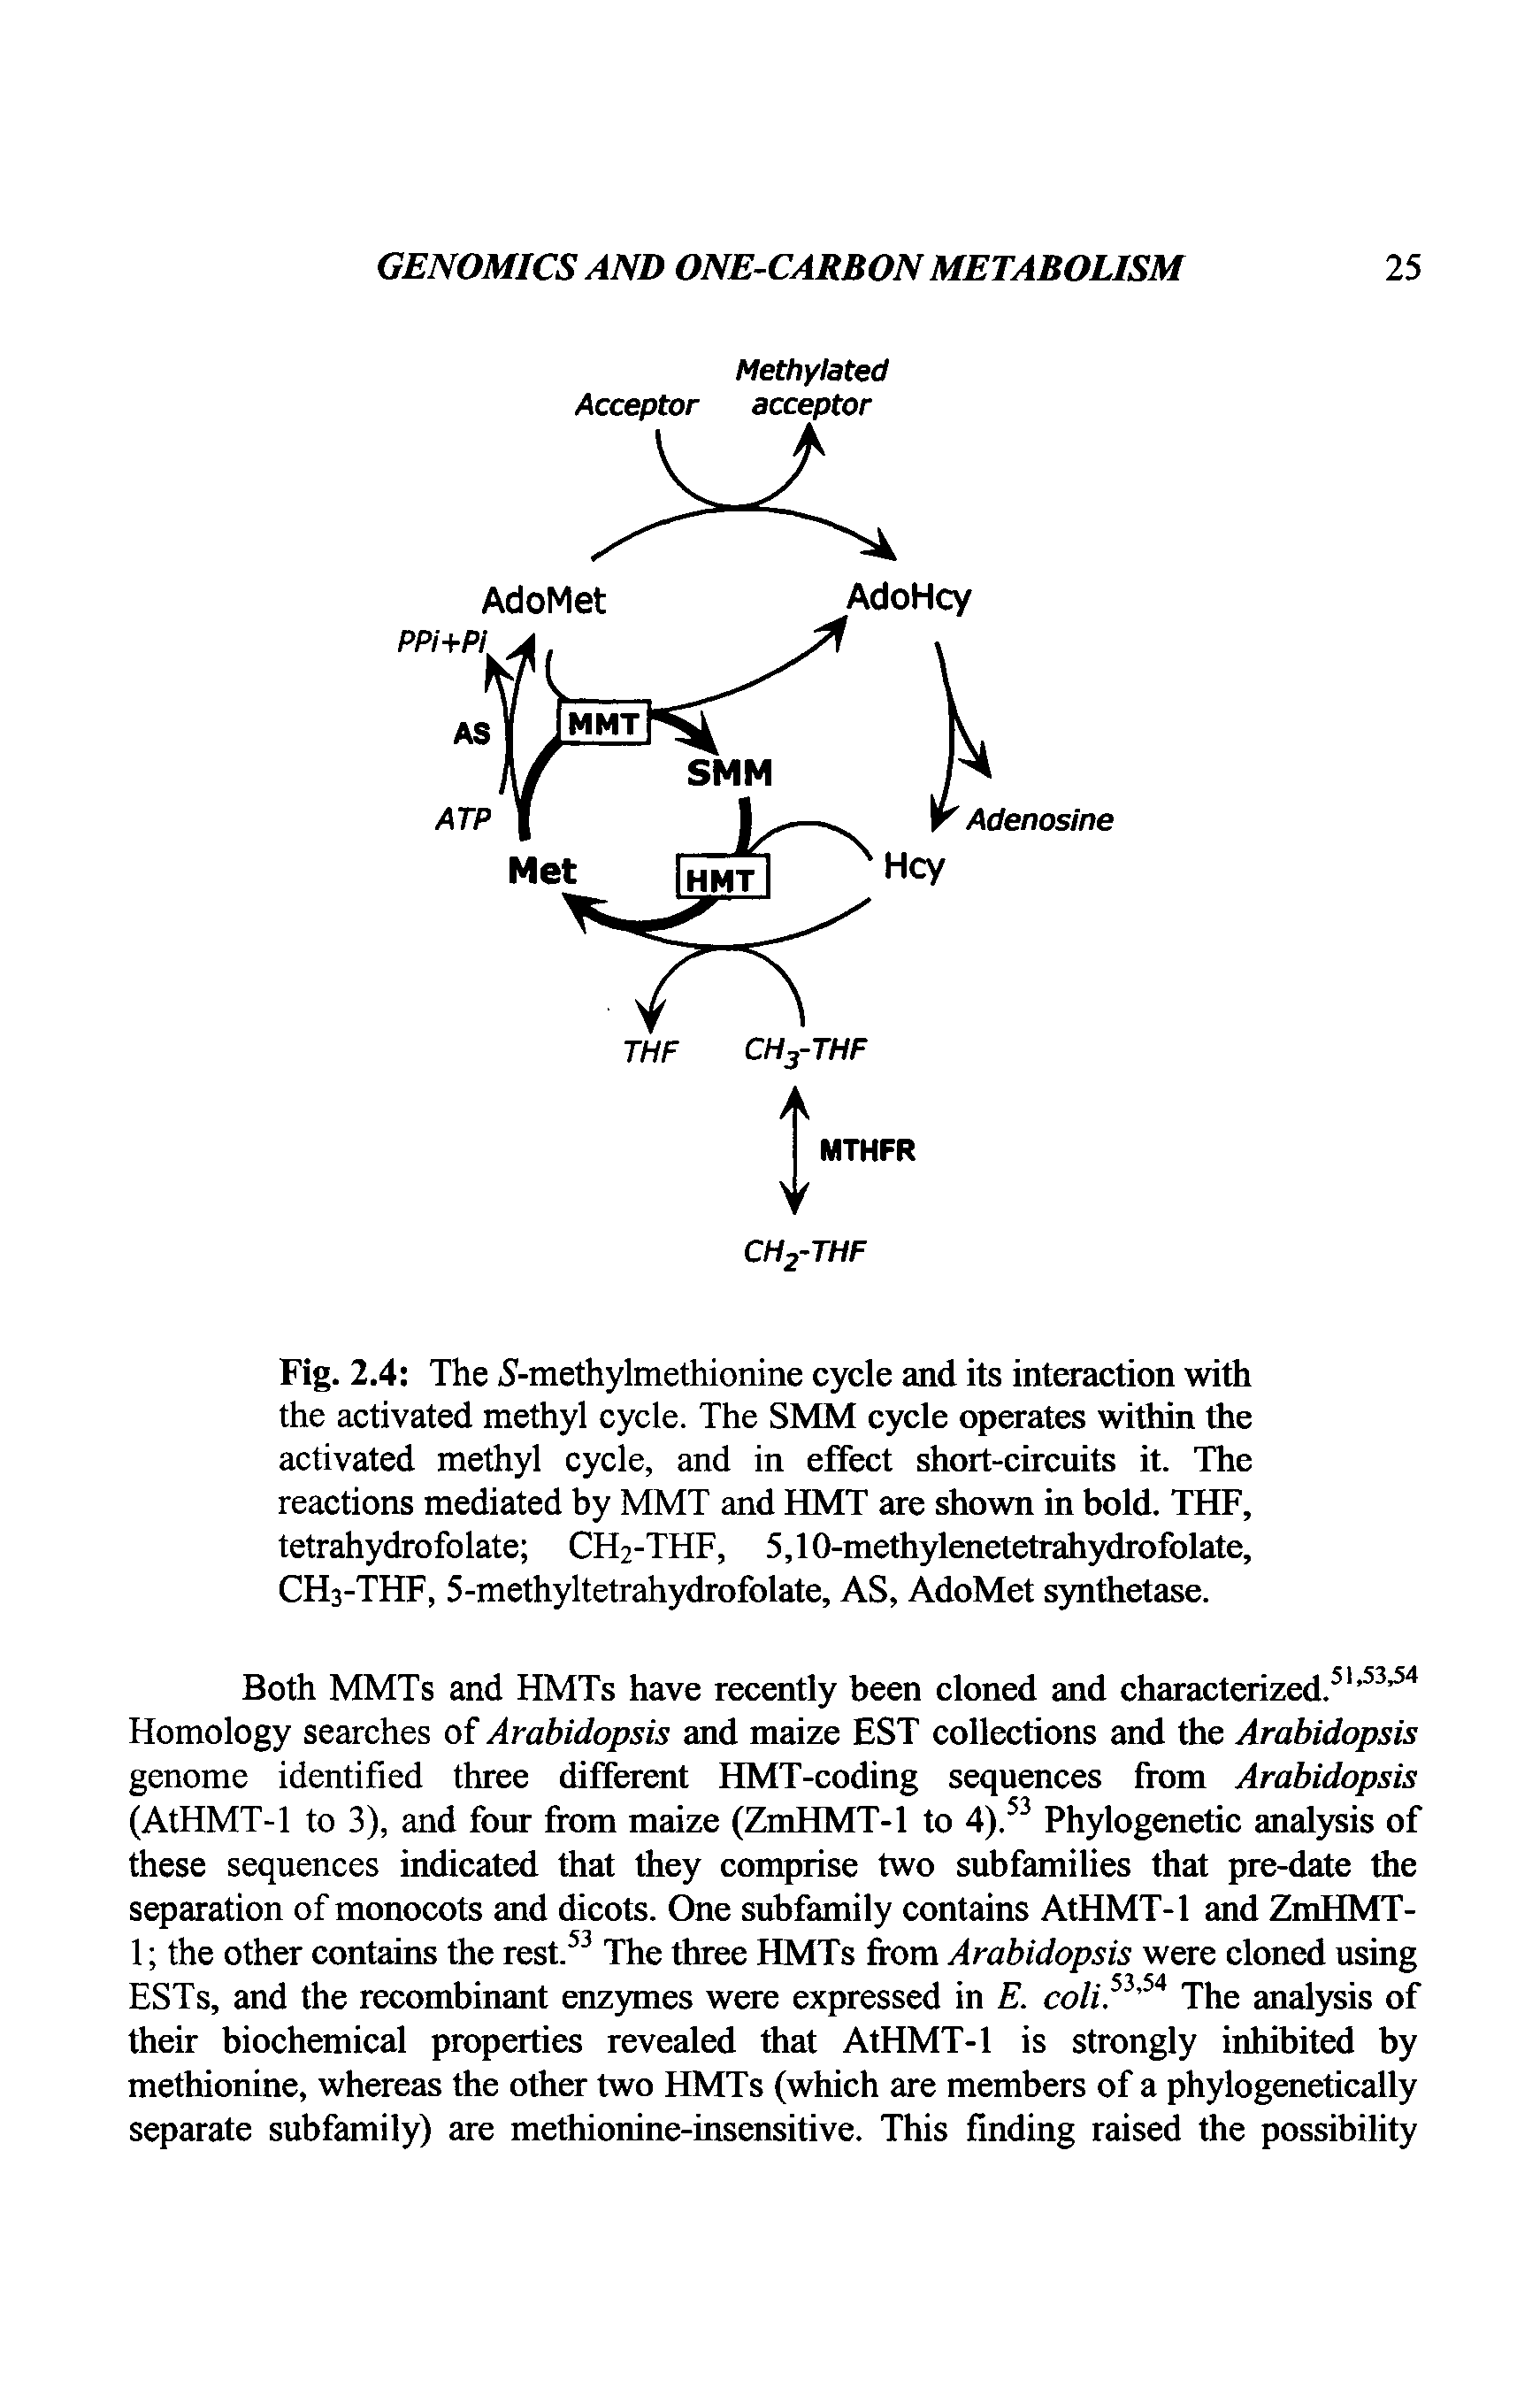 Fig. 2.4 The S-methylmethionine cycle and its interaction with the activated methyl cycle. The SMM cycle operates within the activated methyl cycle, and in effect short-circuits it. The reactions mediated by MMT and HMT are shown in bold. THF, tetrahydrofolate CH2-THF, 5,10-methylenetetrahydrofolate,...